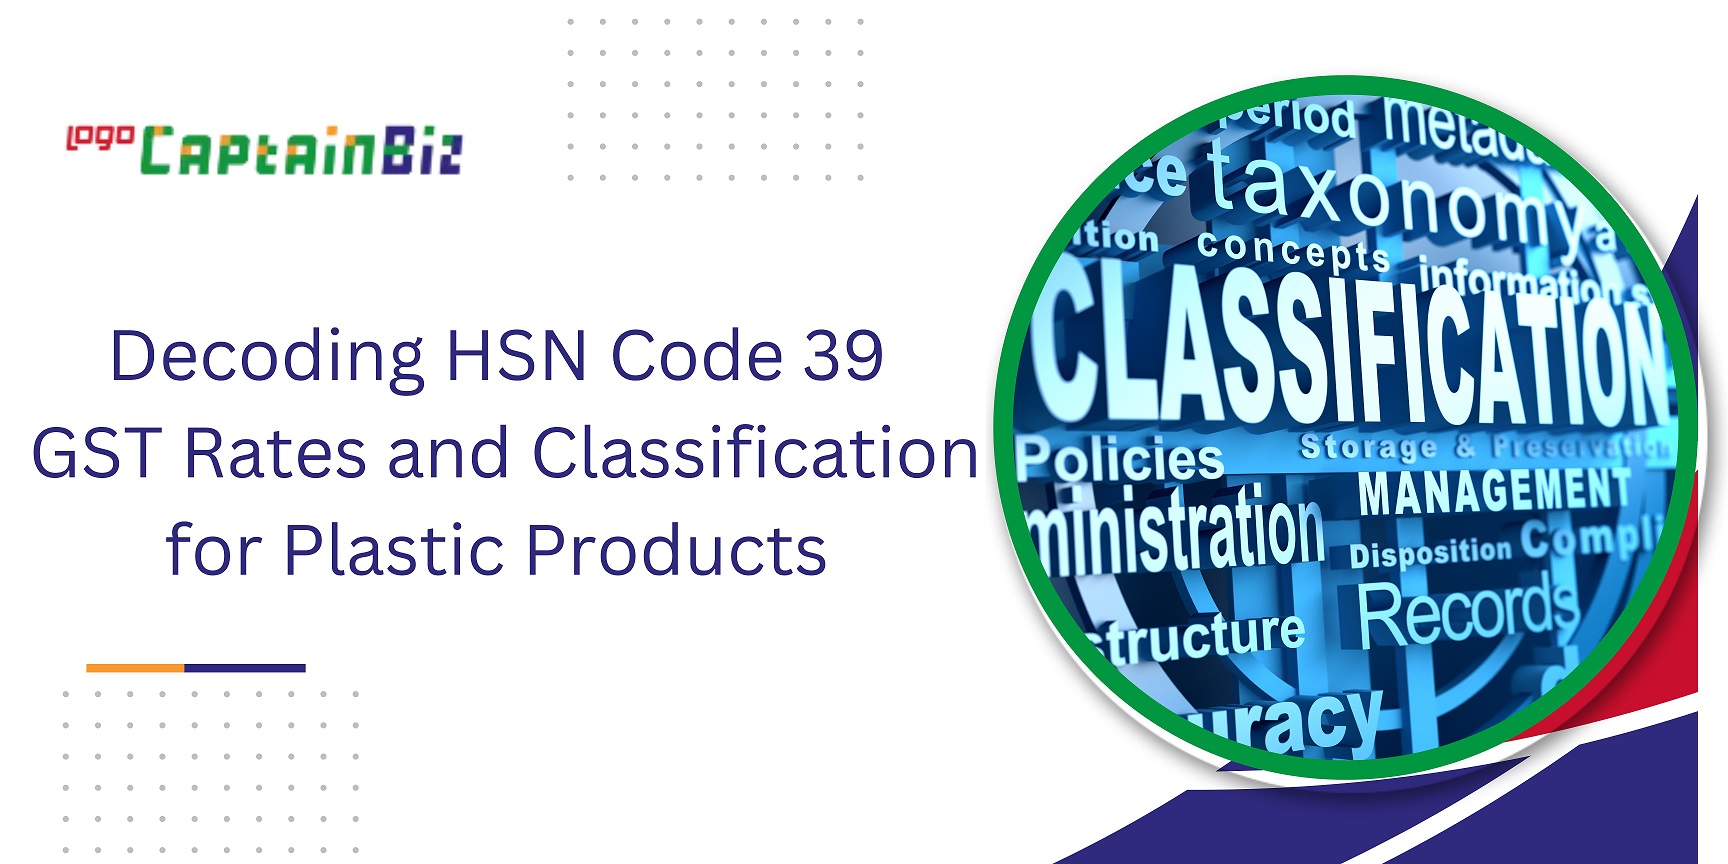 CaptainBiz: Decoding HSN Code 39 GST Rates and Classification for Plastic Products